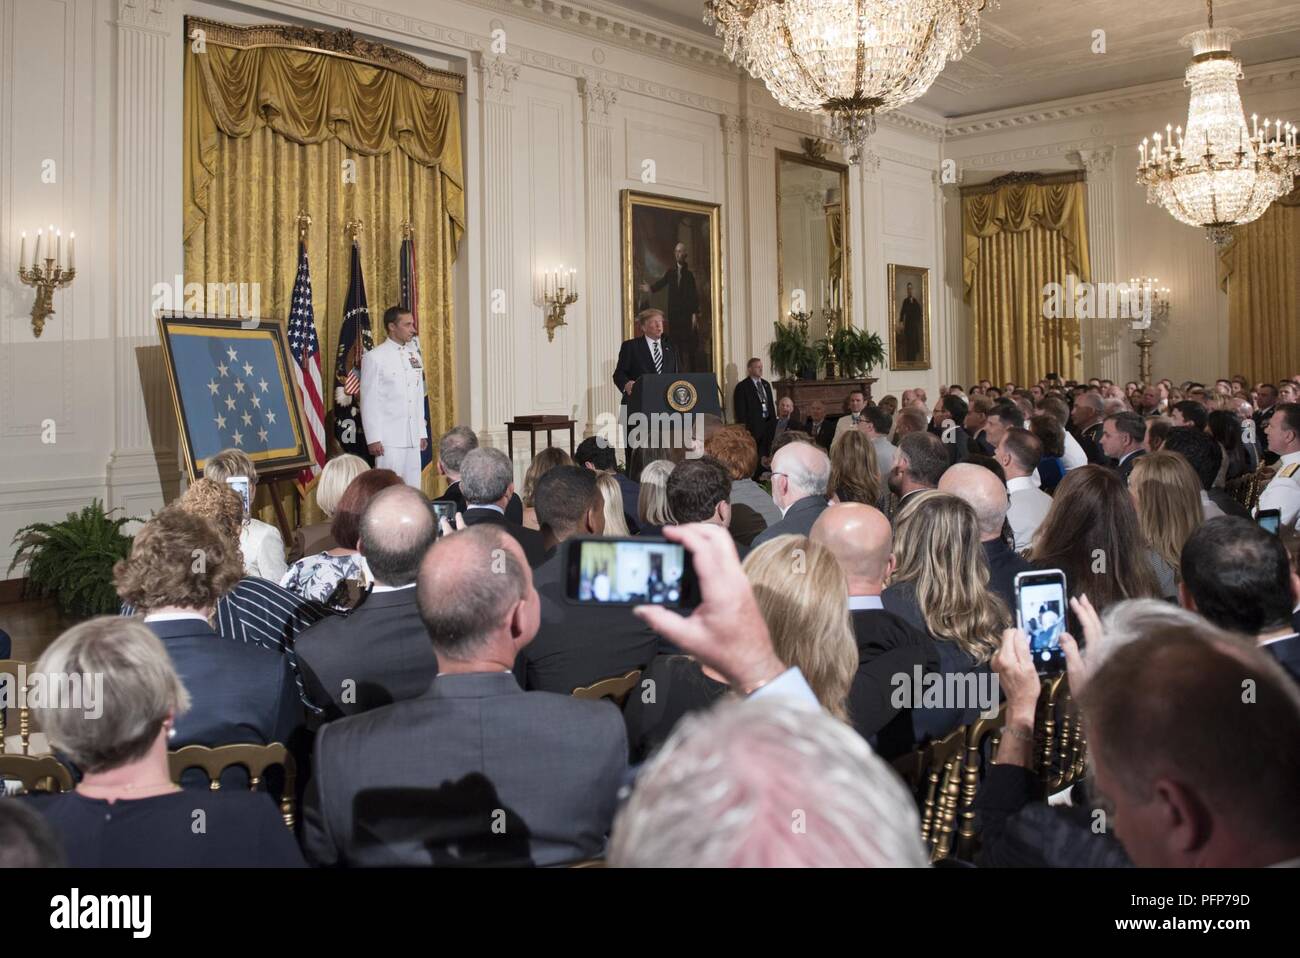 (May 24, 2018) President Donald J. Trump delivers remarks during the Medal of Honor ceremony in honor of retired Master Chief Special Warfare Operator (SEAL) Britt Slabinski at the White House in Washington, D.C. Slabinski received the Medal of Honor for his actions during Operation Anaconda in Afghanistan in March 2002. Stock Photo